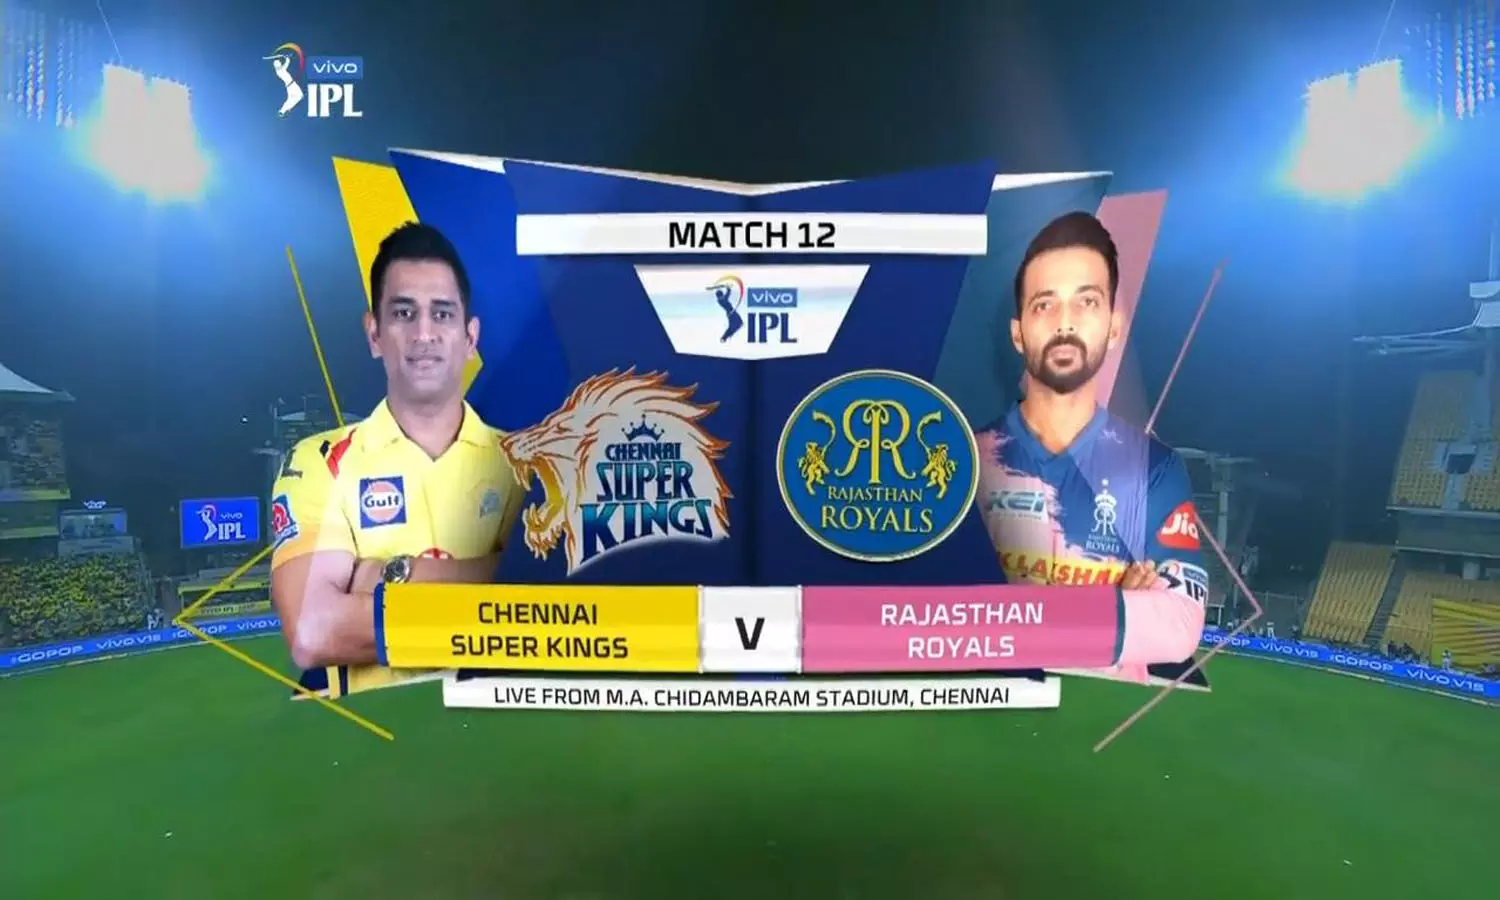 CSK vs RR, IPL 2021: All eyes on Dhoni in the battle of Superiors tonight!